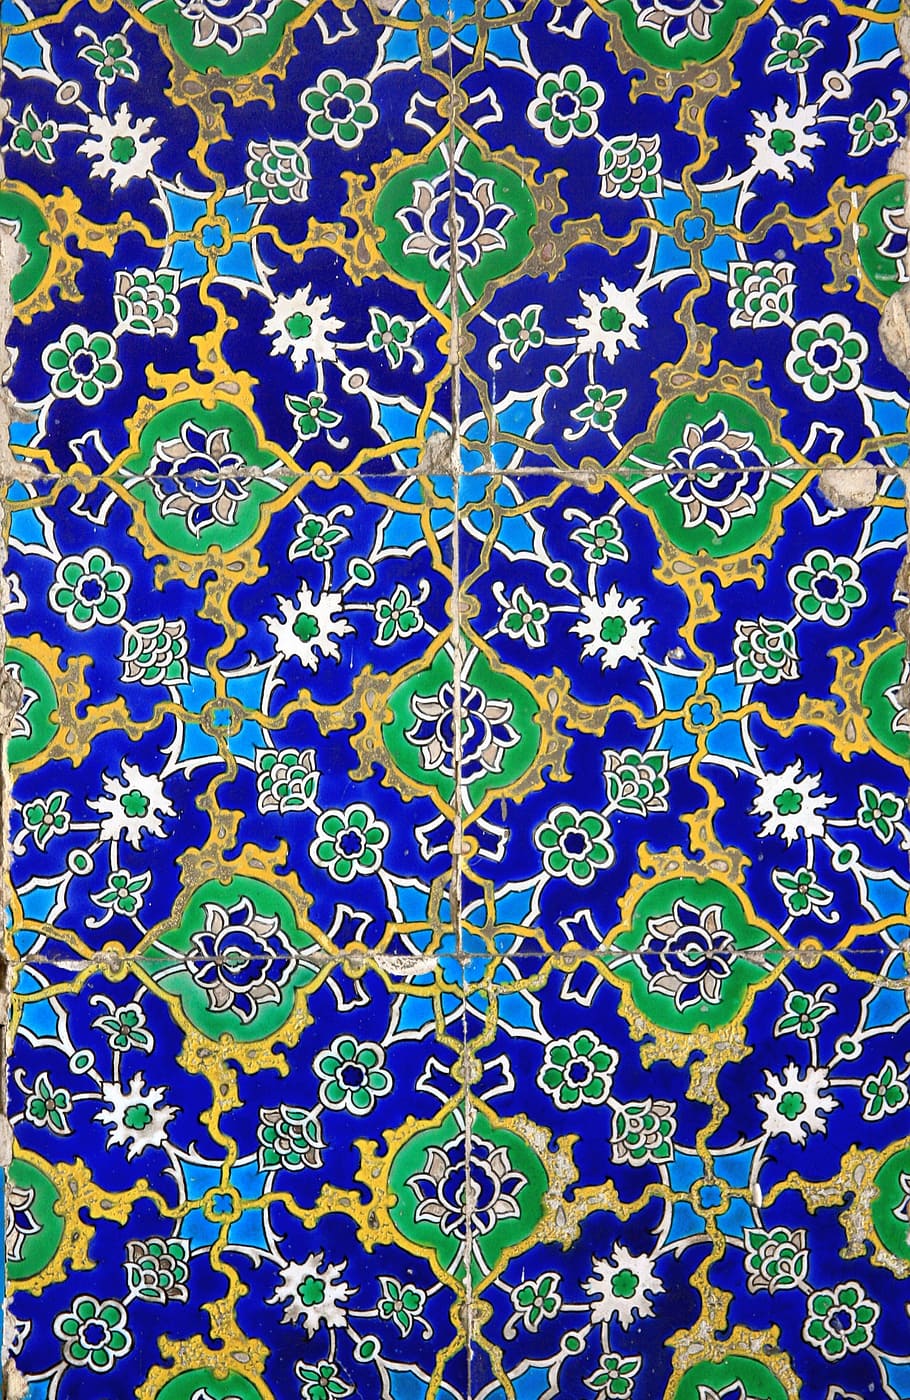 blue, green, and white floral poster, abstract, arabesque, mosaic